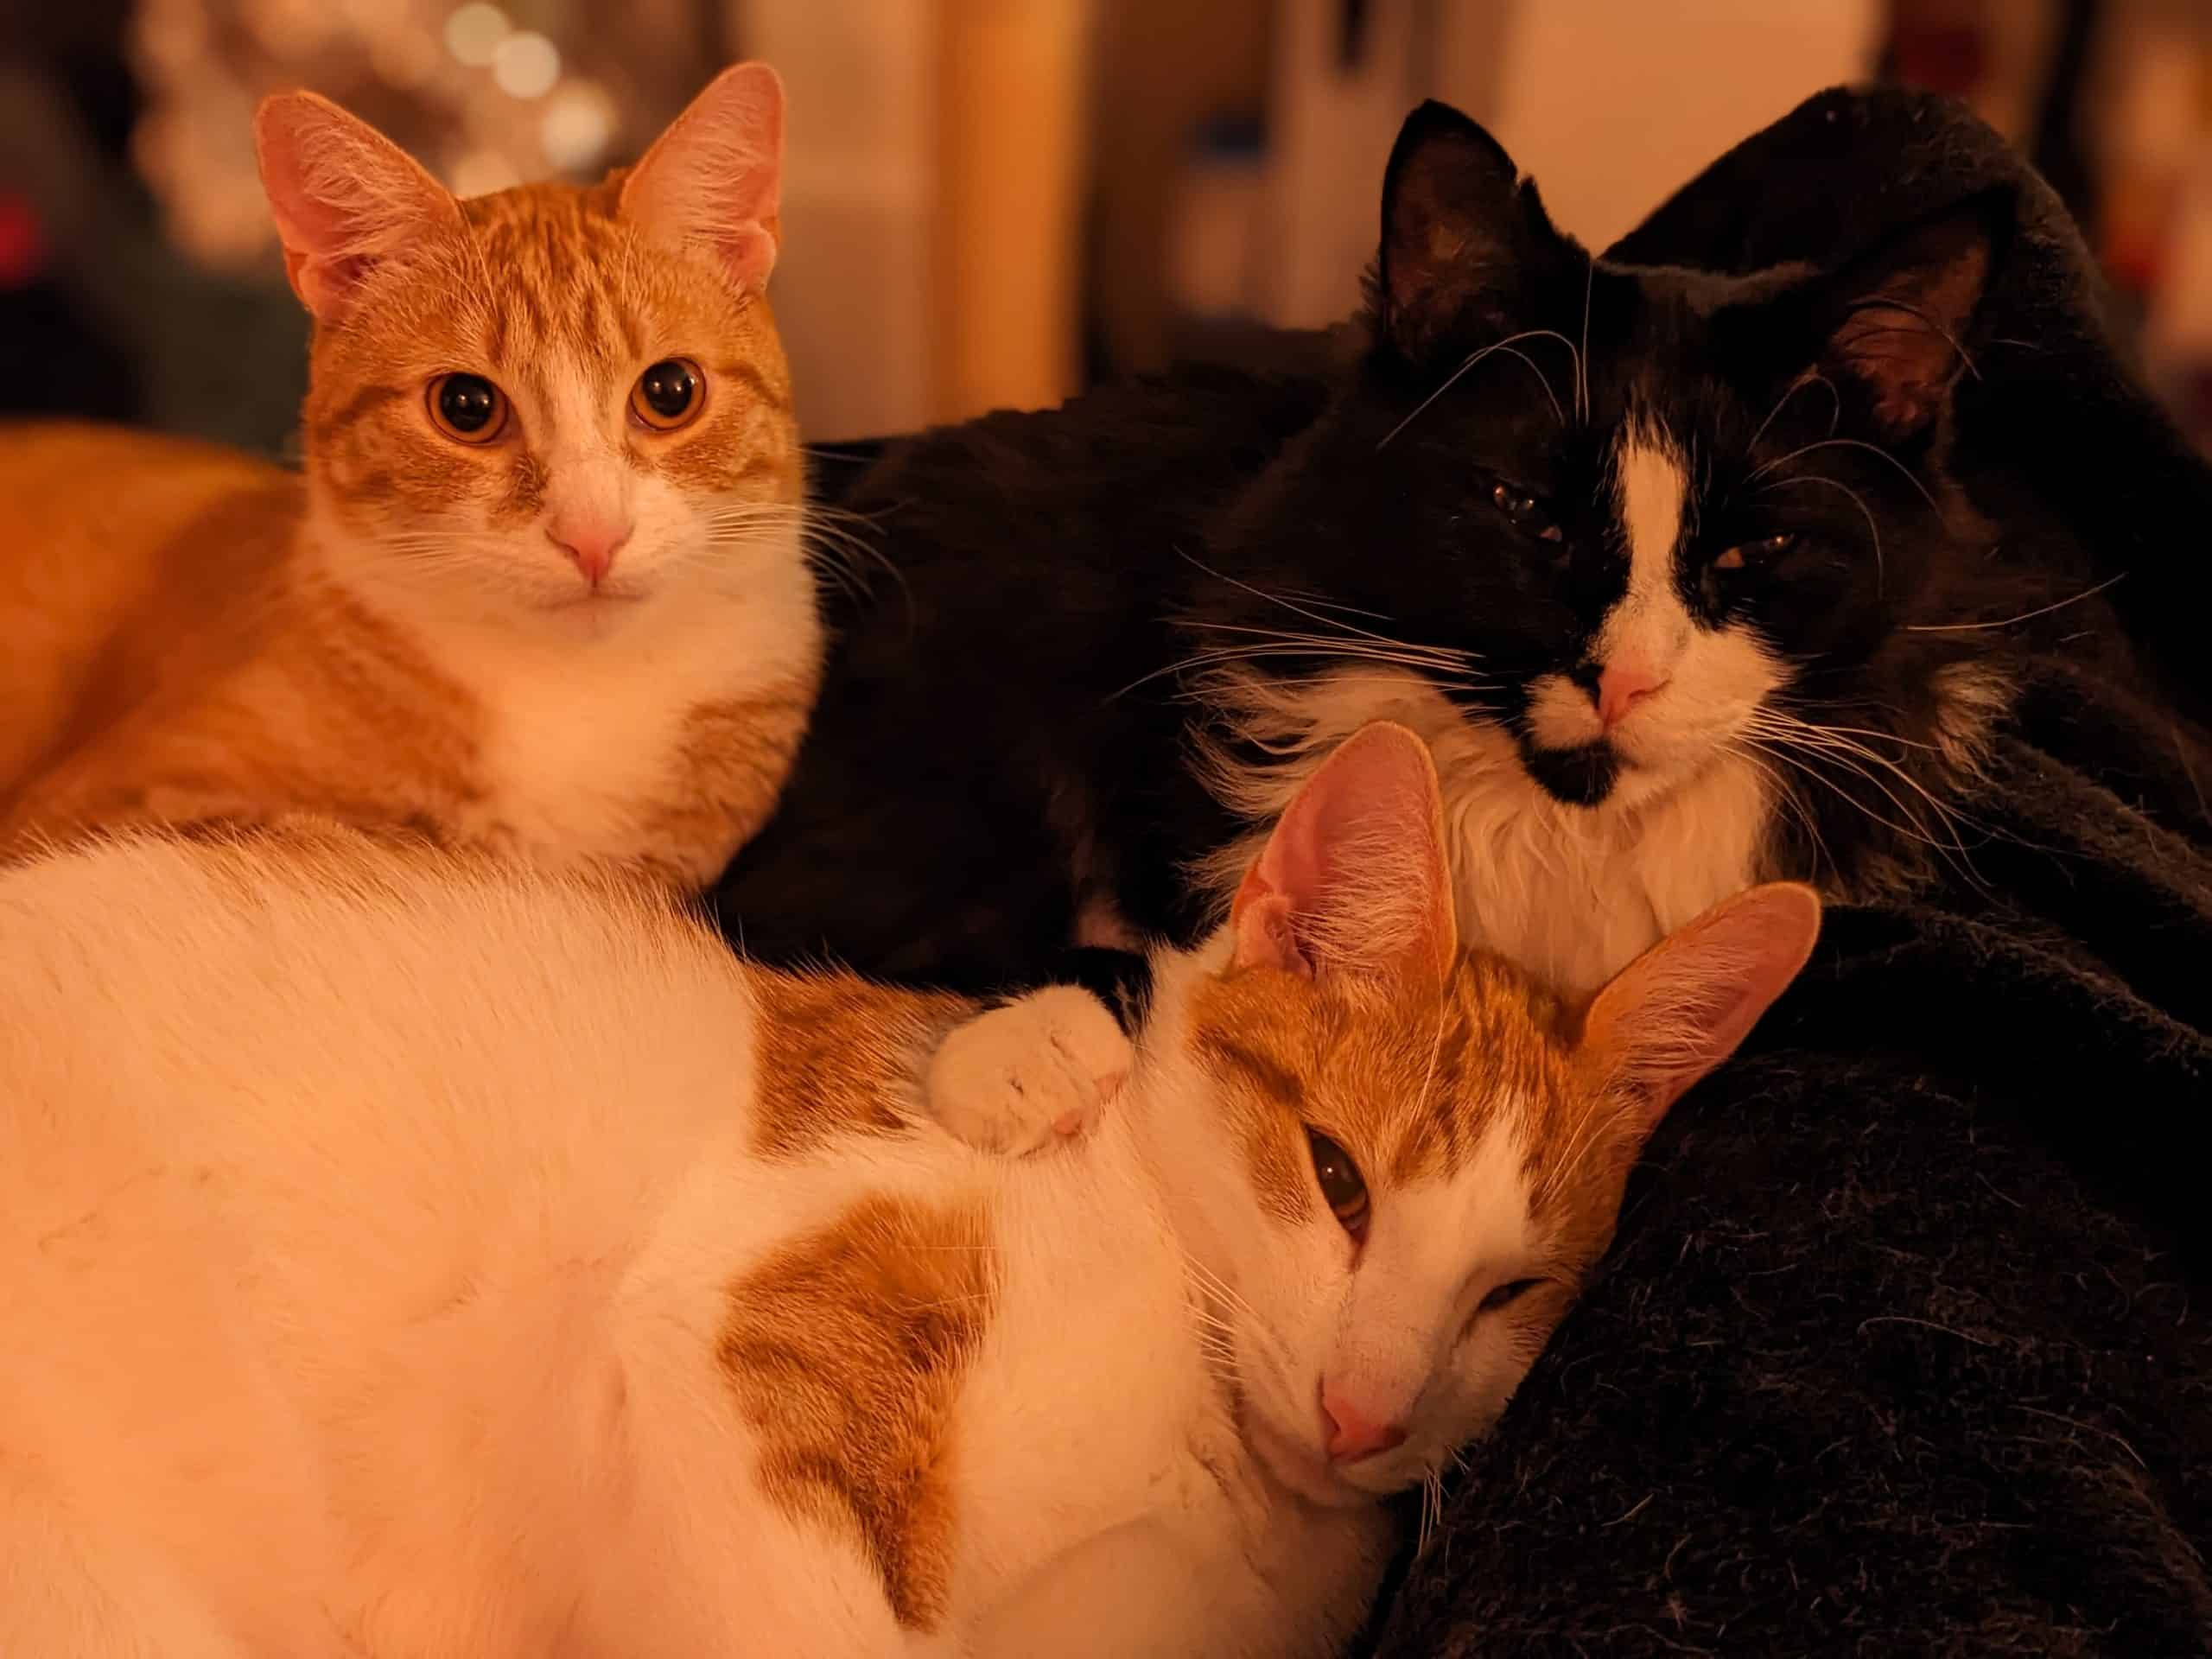 Three cats cuddled on a blanket